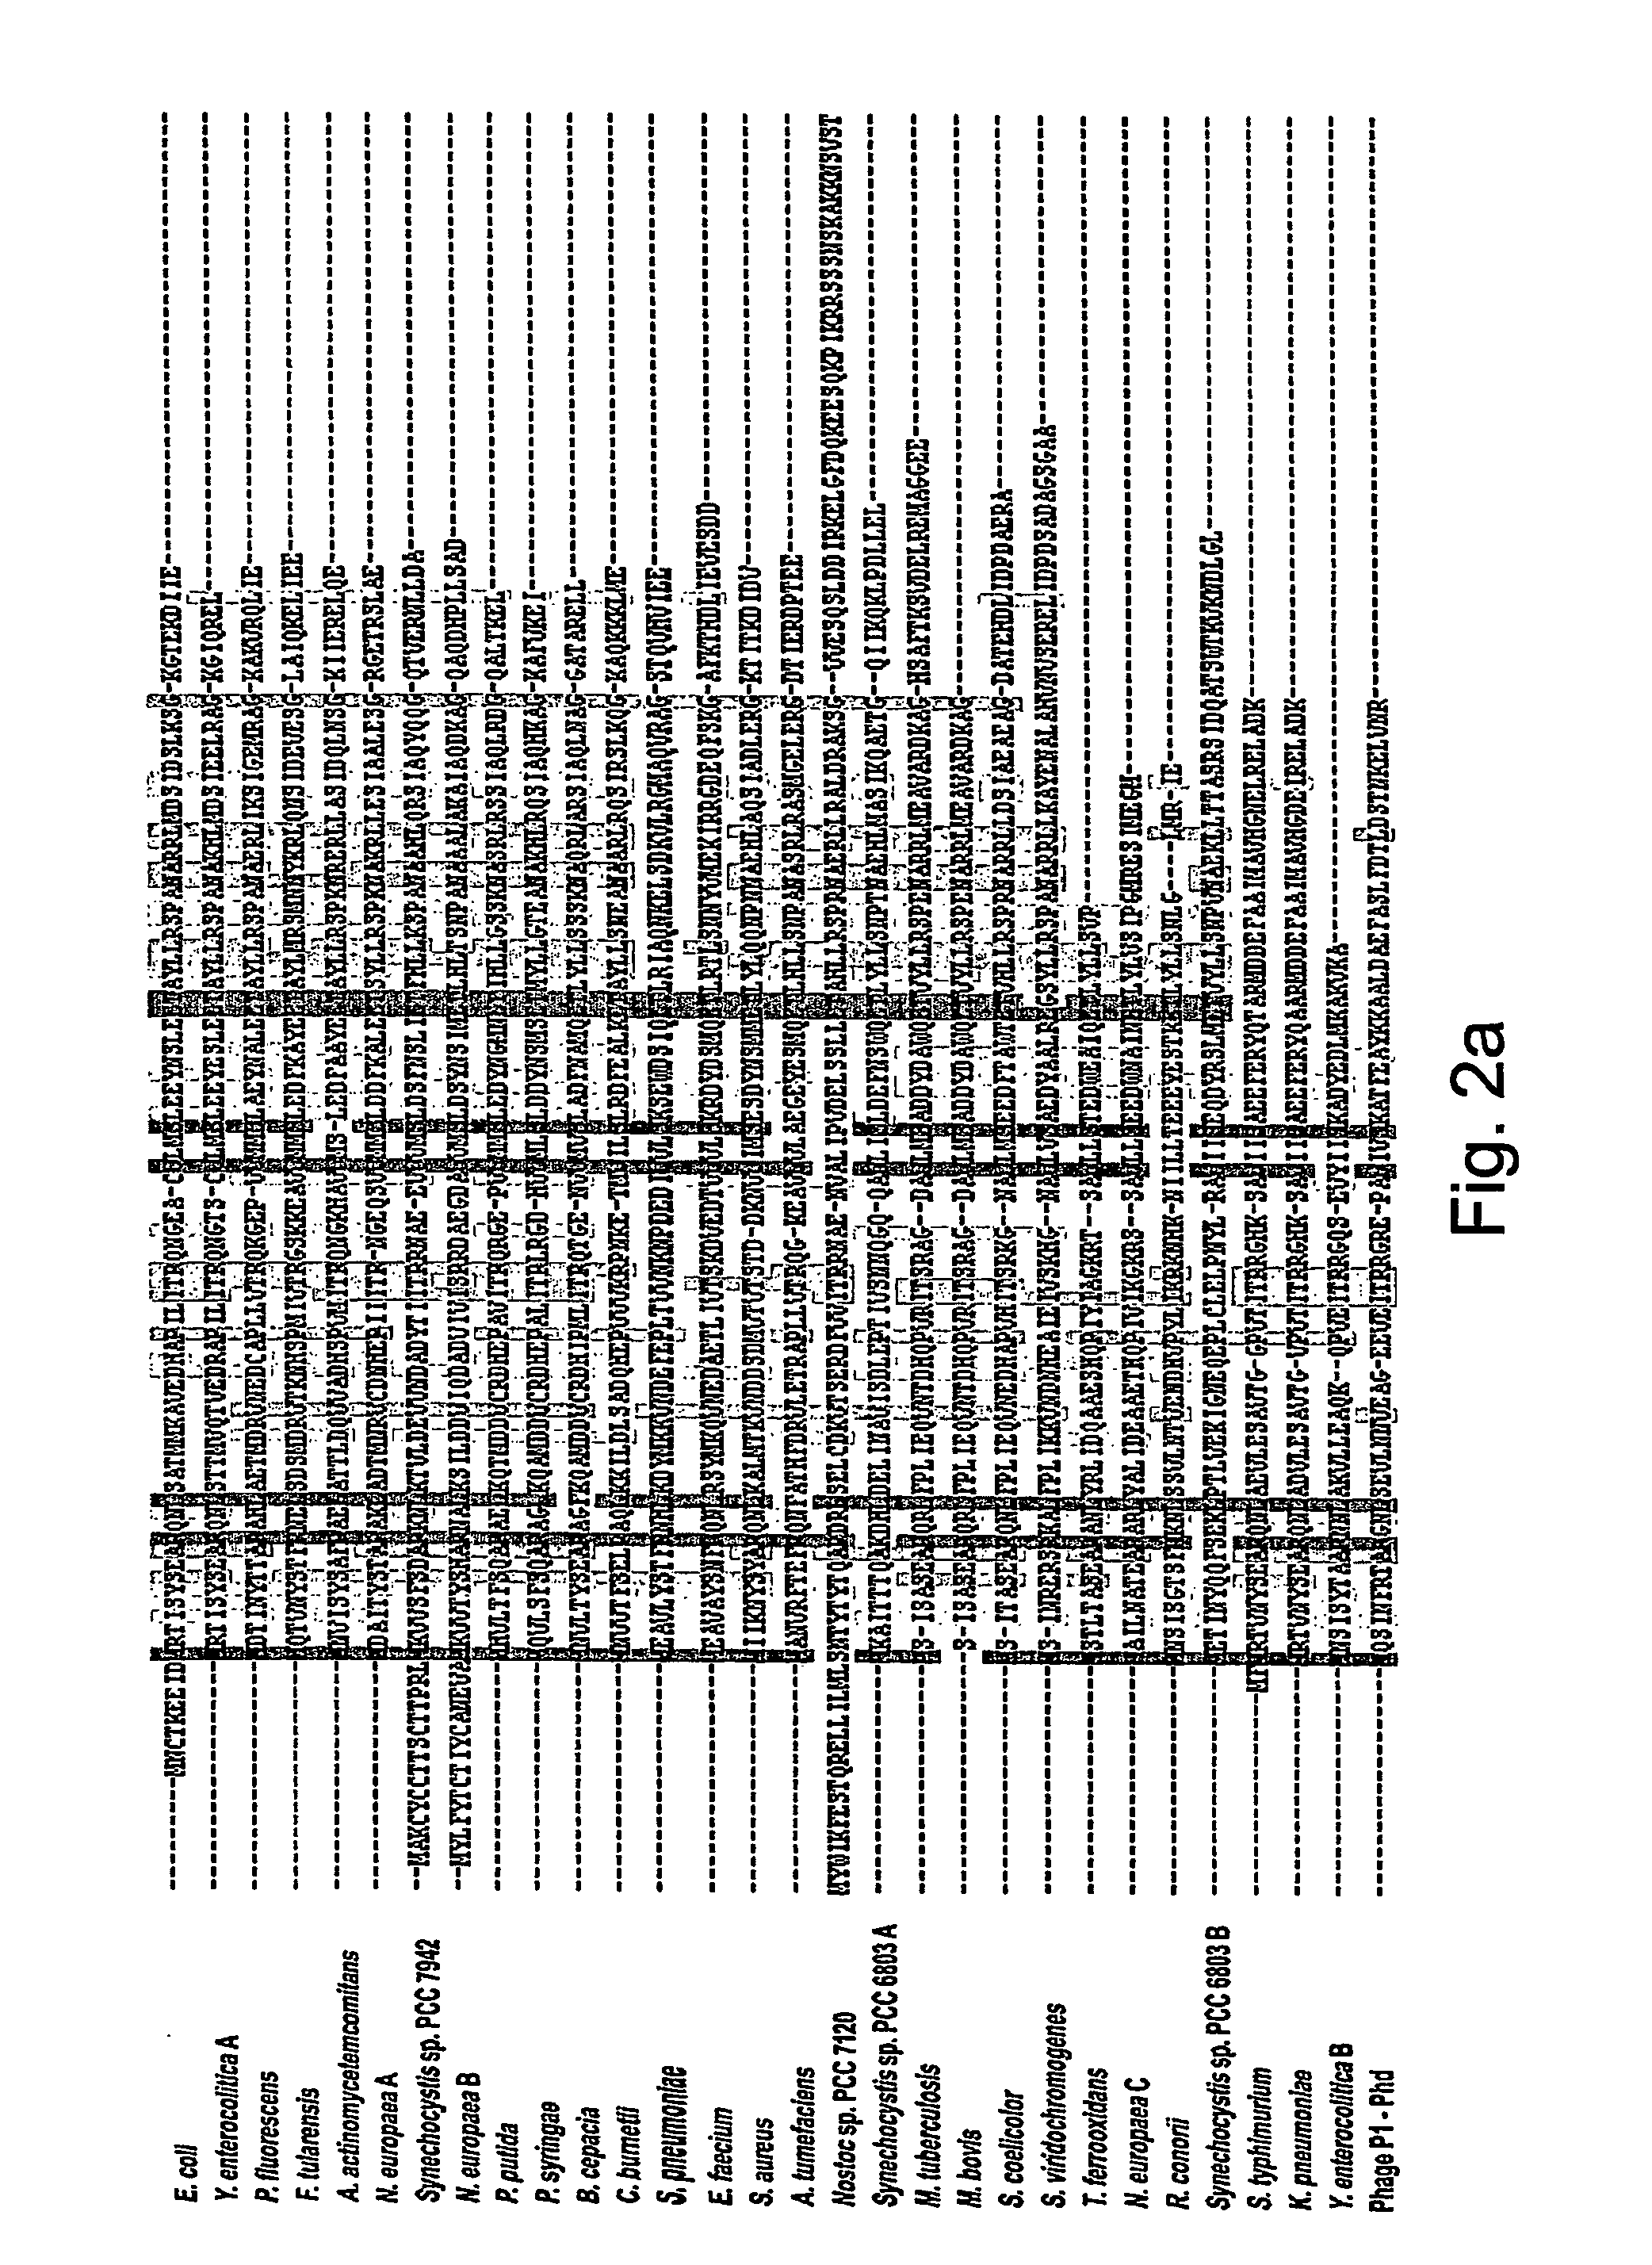 Novel Antibacterial Agents and Methods of Identifying and Utilizing Same